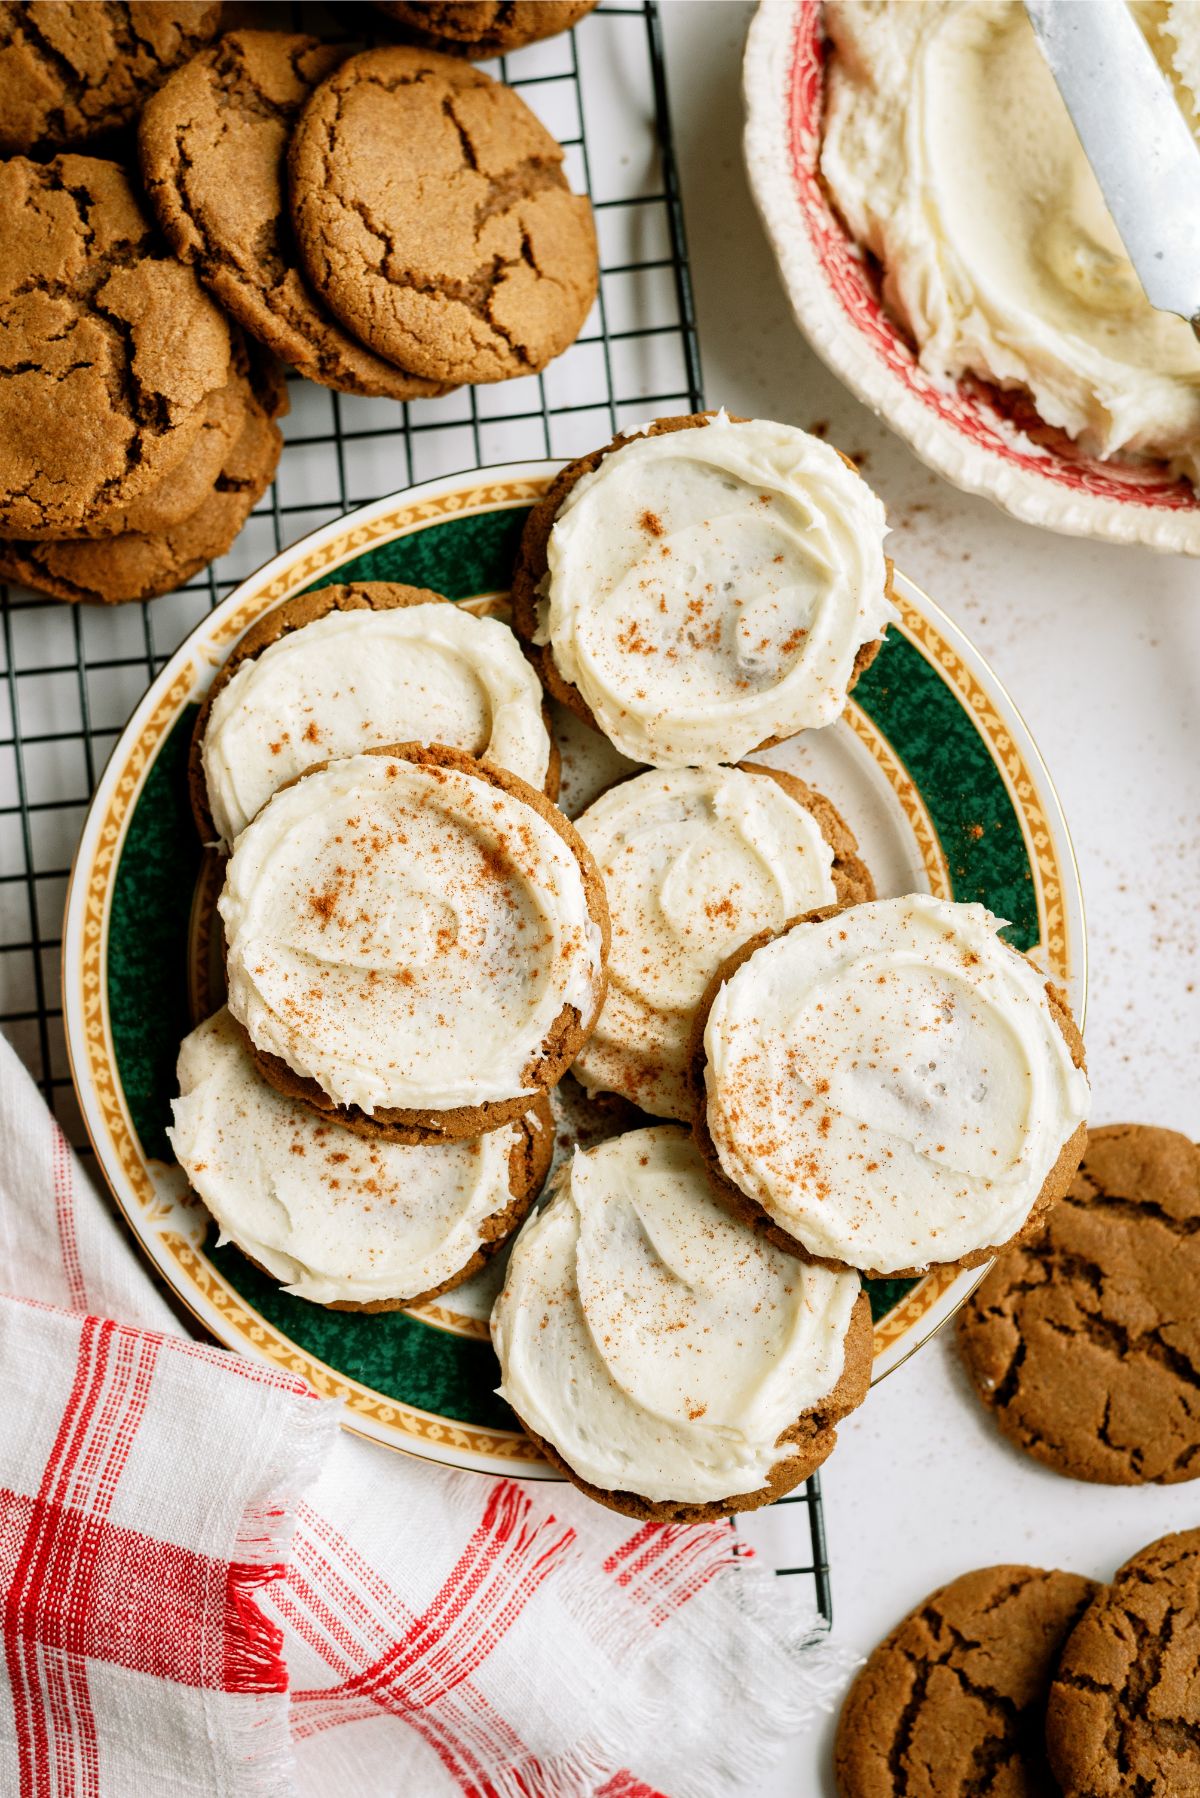 A plate of Ginger Cookies with Eggnog Frosting